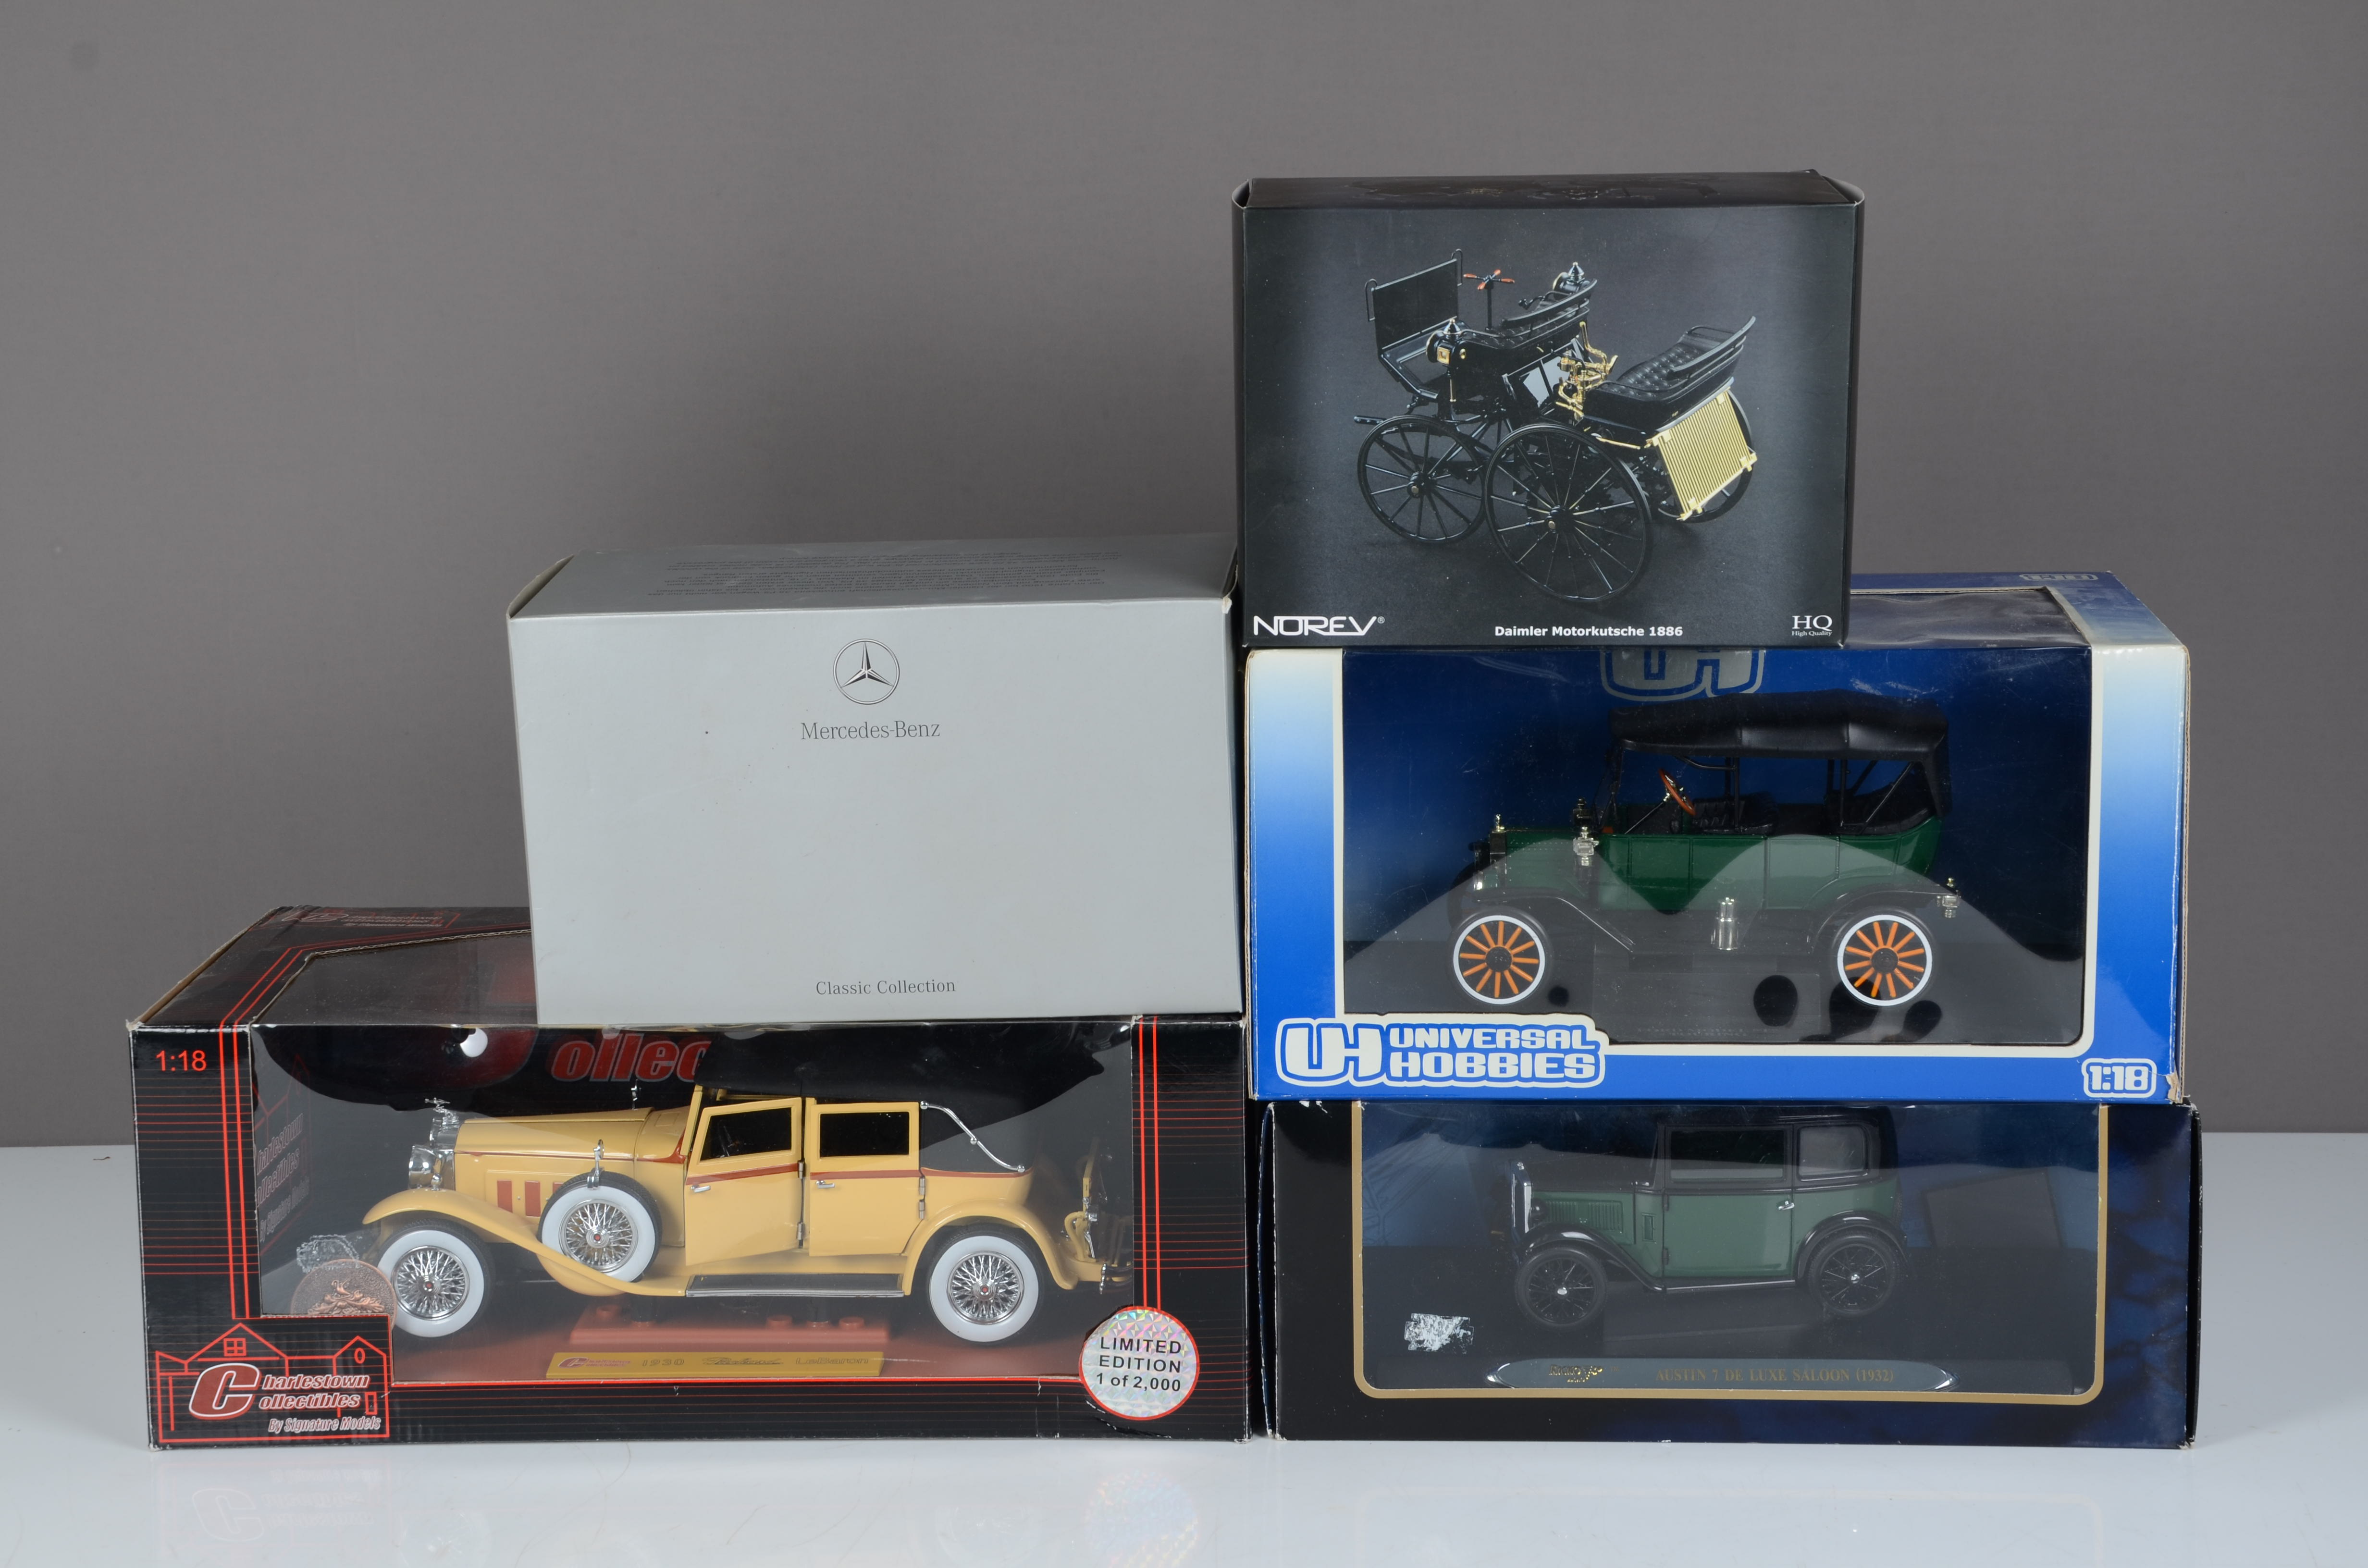 1:18 Scale Victorian and Later Vehicles, a boxed group comprises Norev Daimler Motorkutsche 1886,